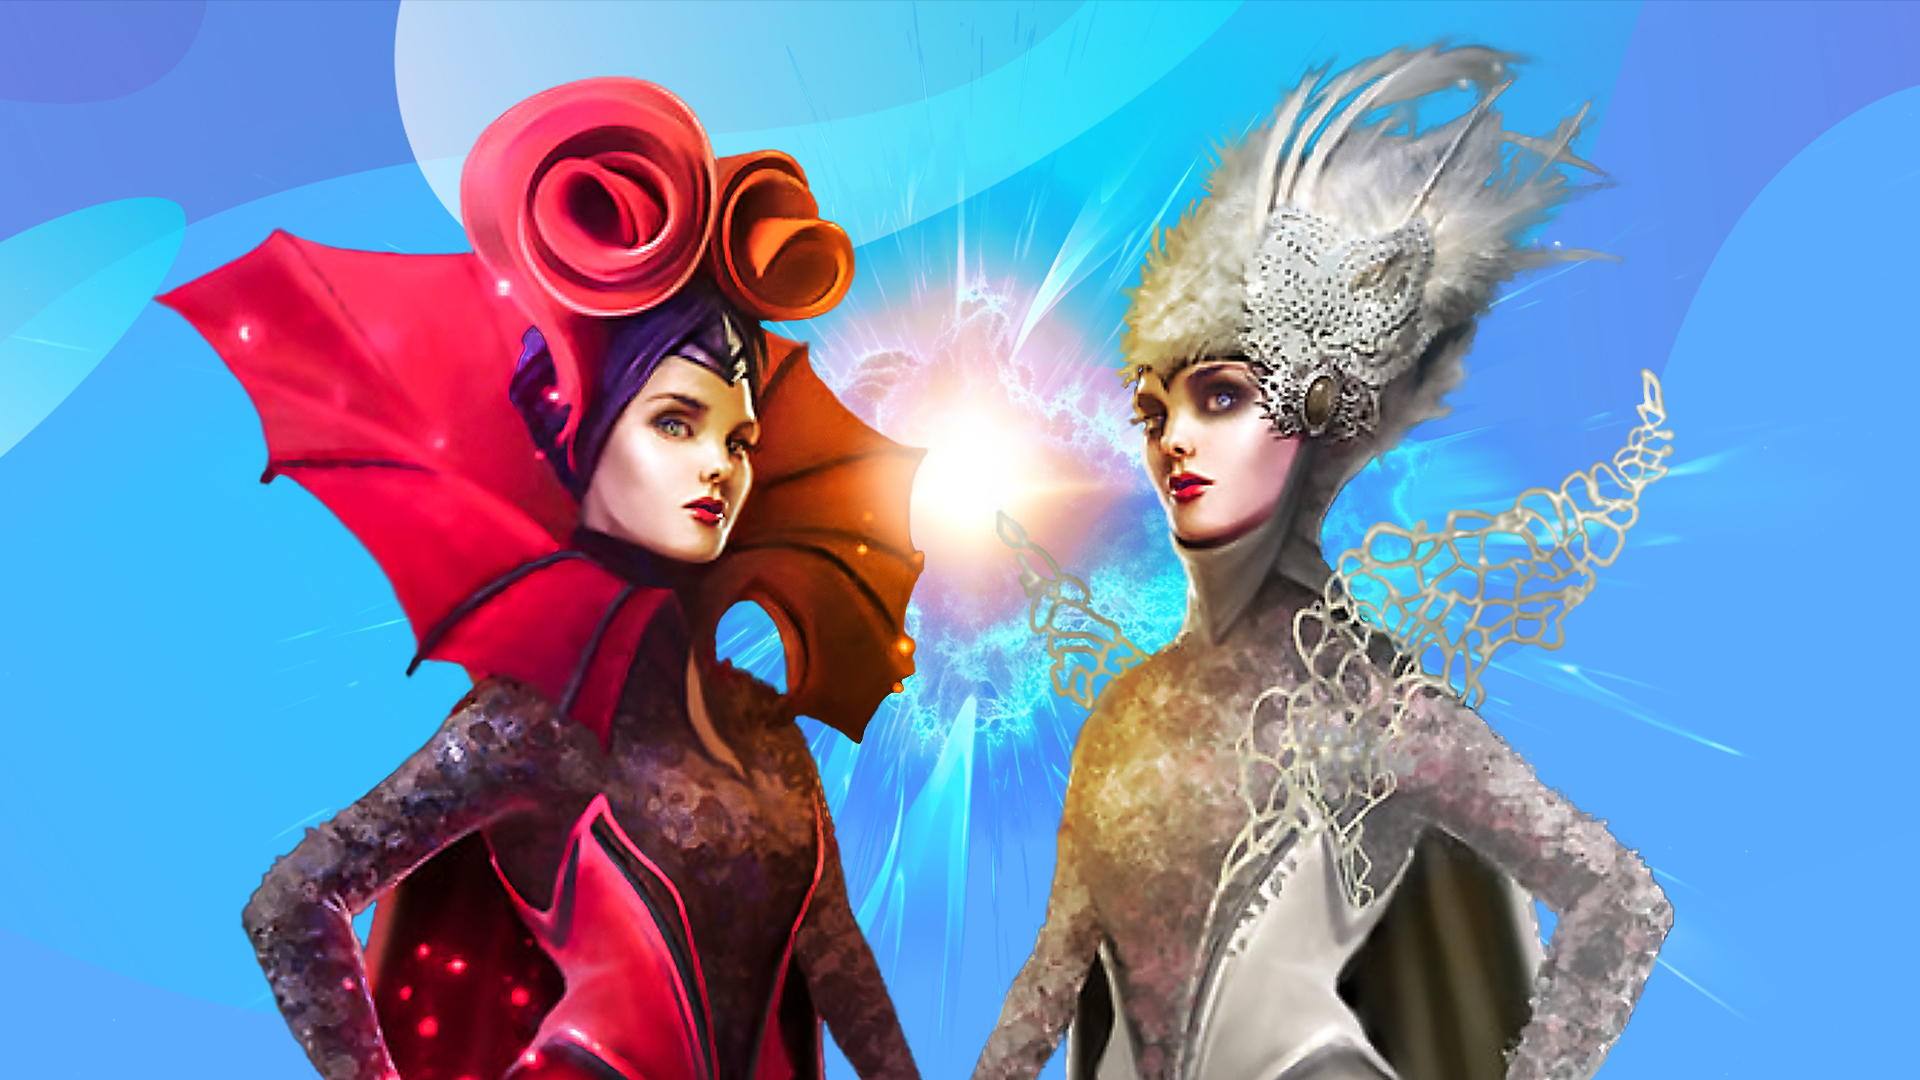 Two animated queens from the SlotsLV slot game Clash of queens stand either side, facing inward. The queen on the left wears a red oversized frill-neck, while the other wears a metallic white and silver suit with a tall, white furry hat.